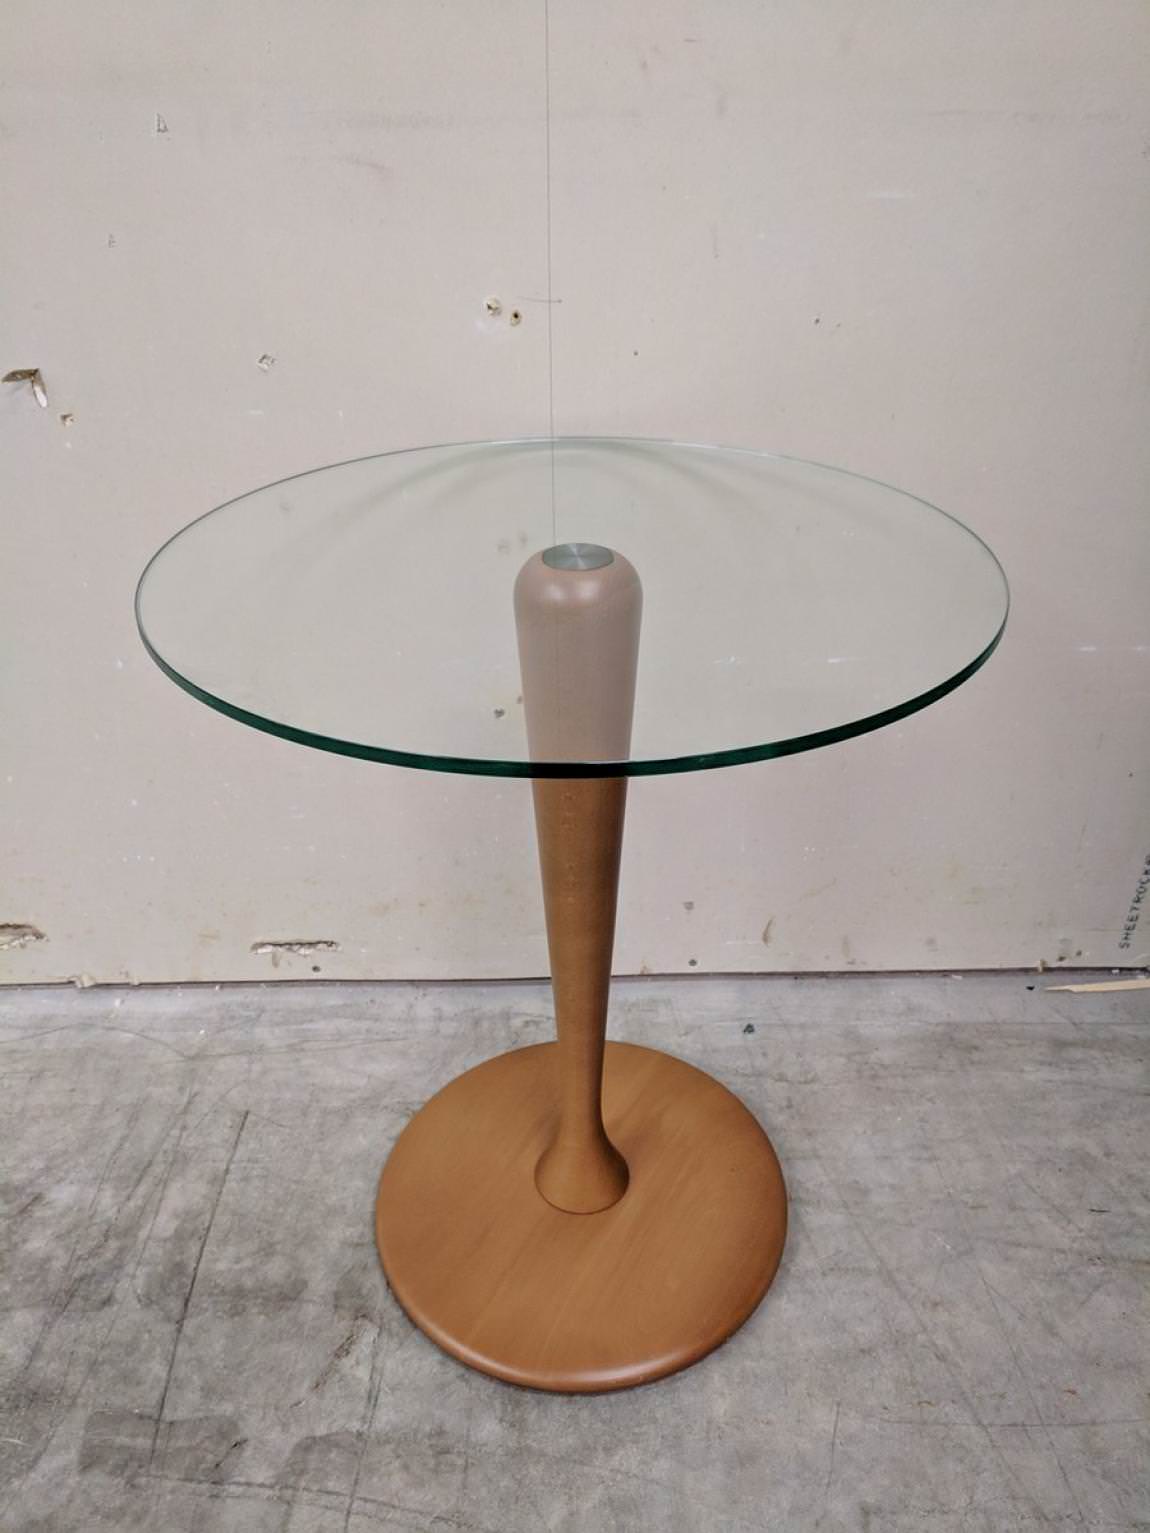 18” Round Glass Top Table